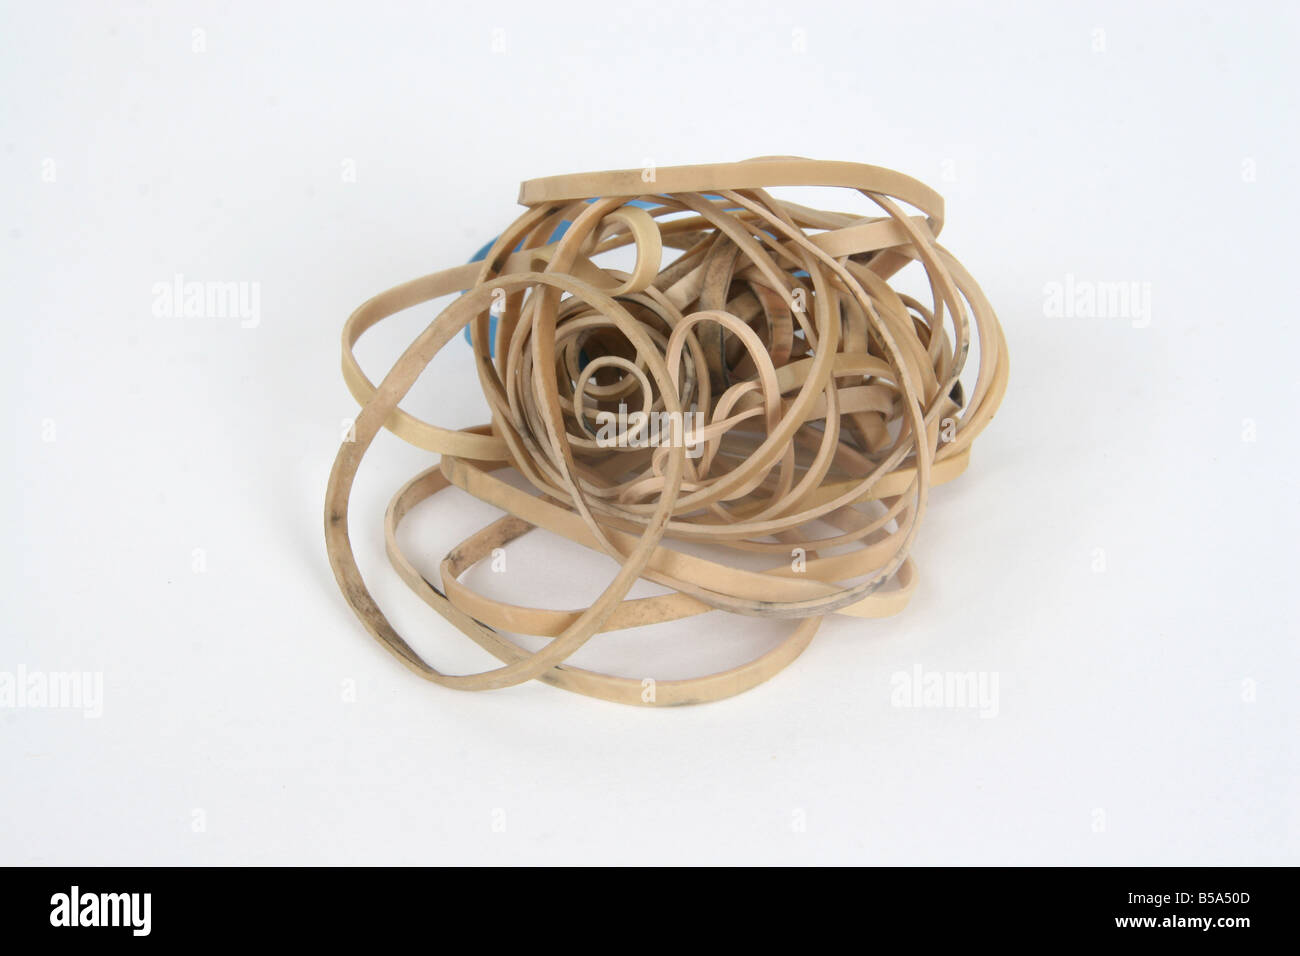 A bunch of rubber bands Stock Photo